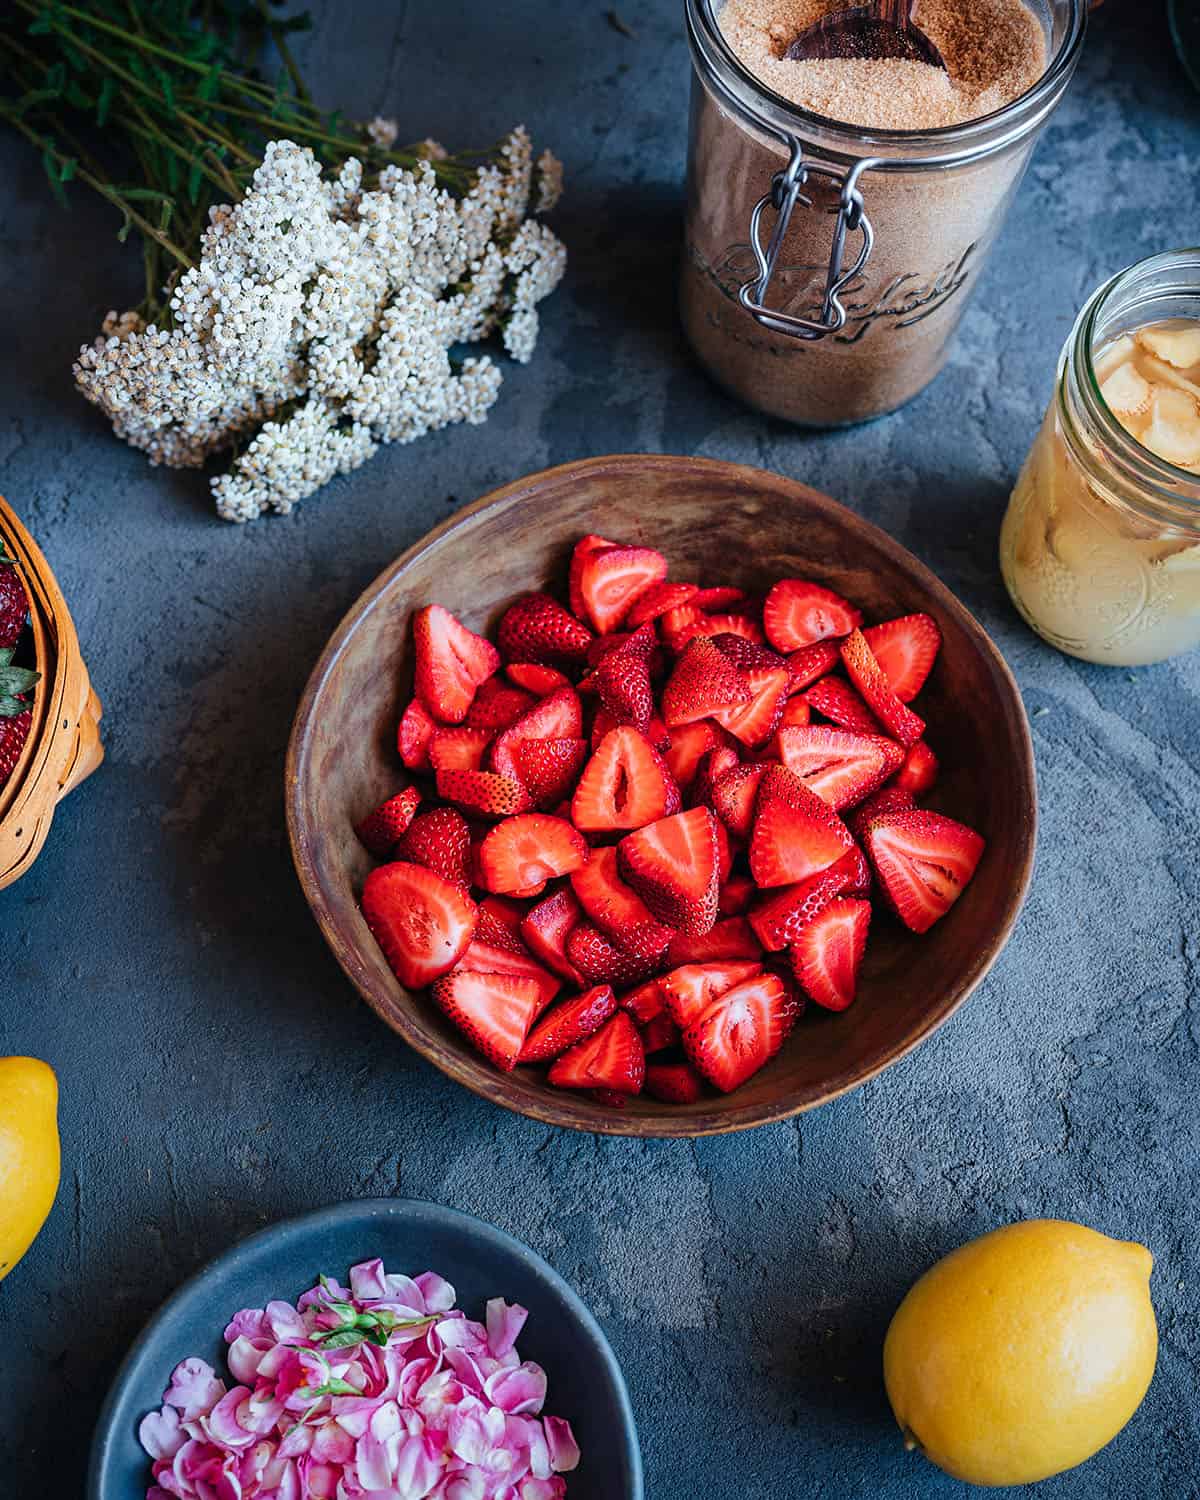 Sliced strawberries in a bowl surrounded by other soda ingredients, a lemon, yarrow, and rose petals.